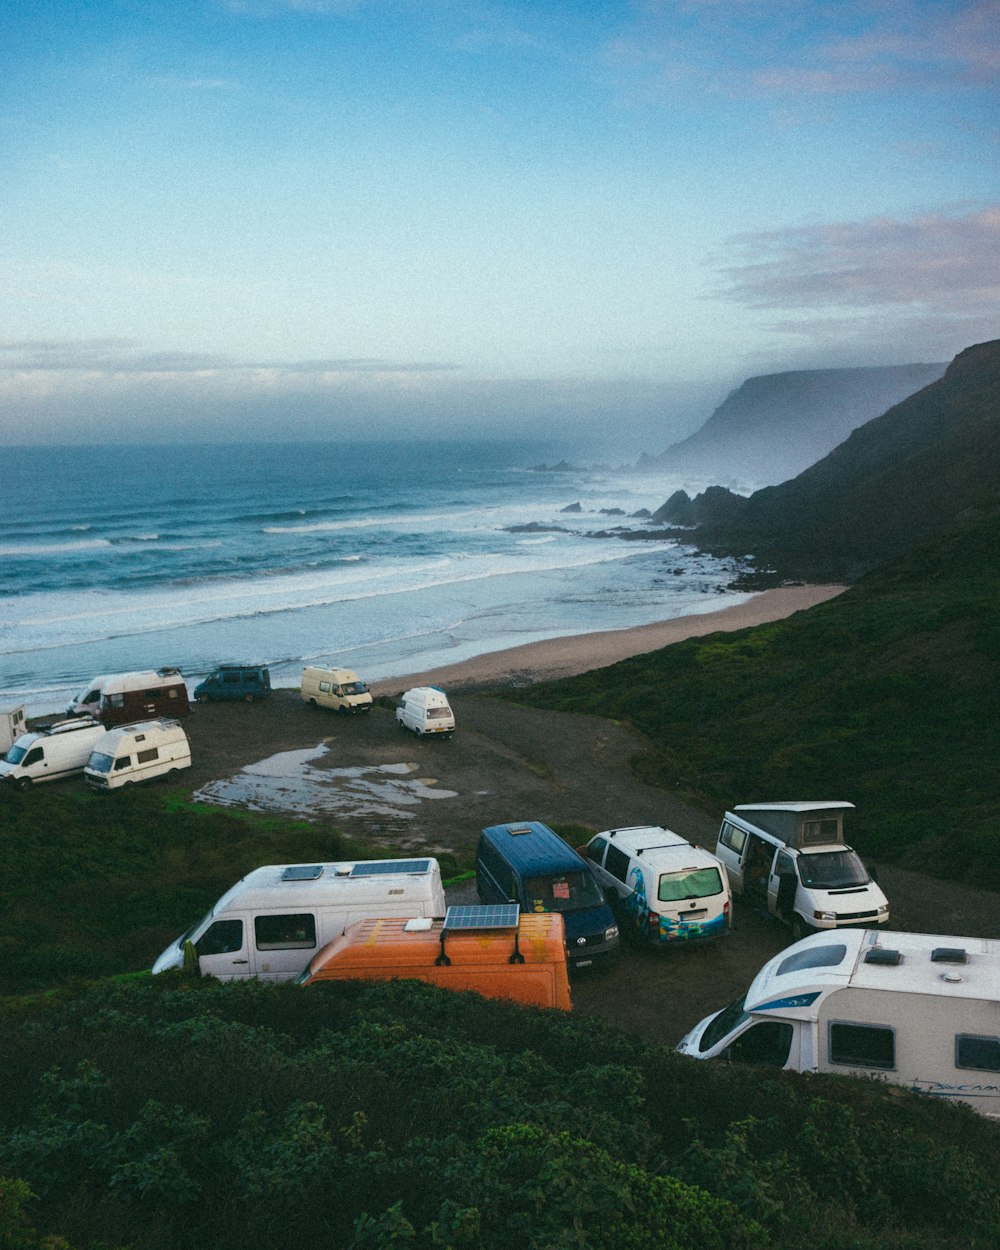 a group of campers parked on a beach next to the ocean